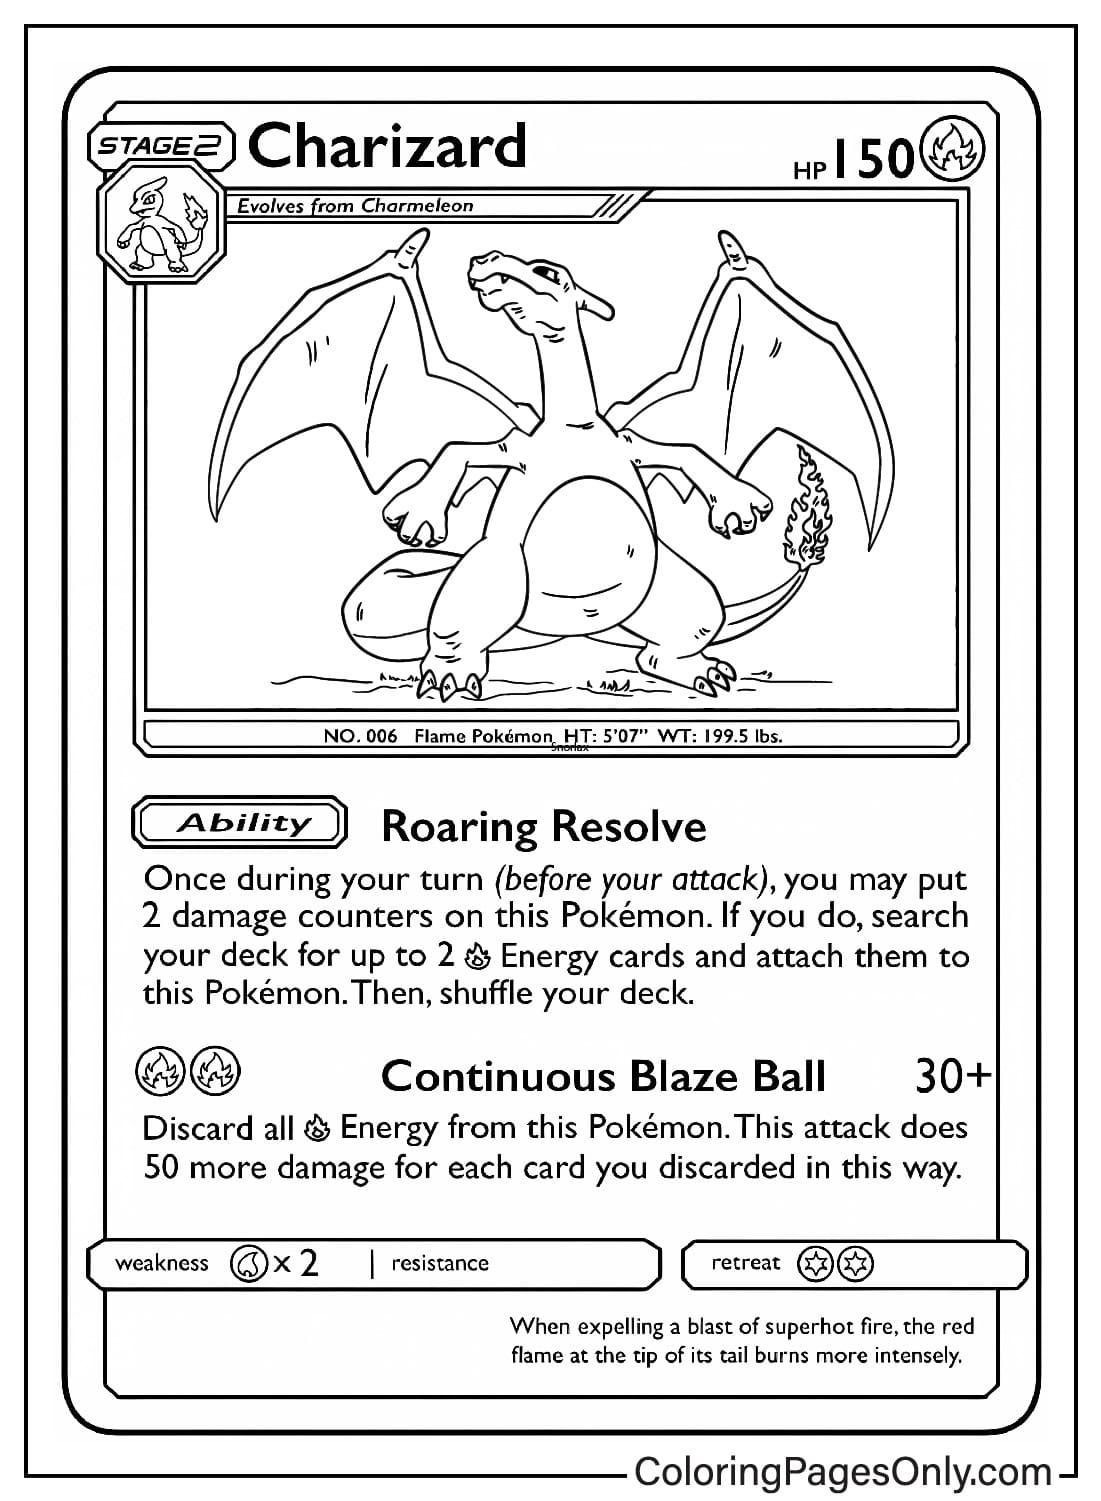 Charizard Pokemon Card Coloring Page from Pokemon Card